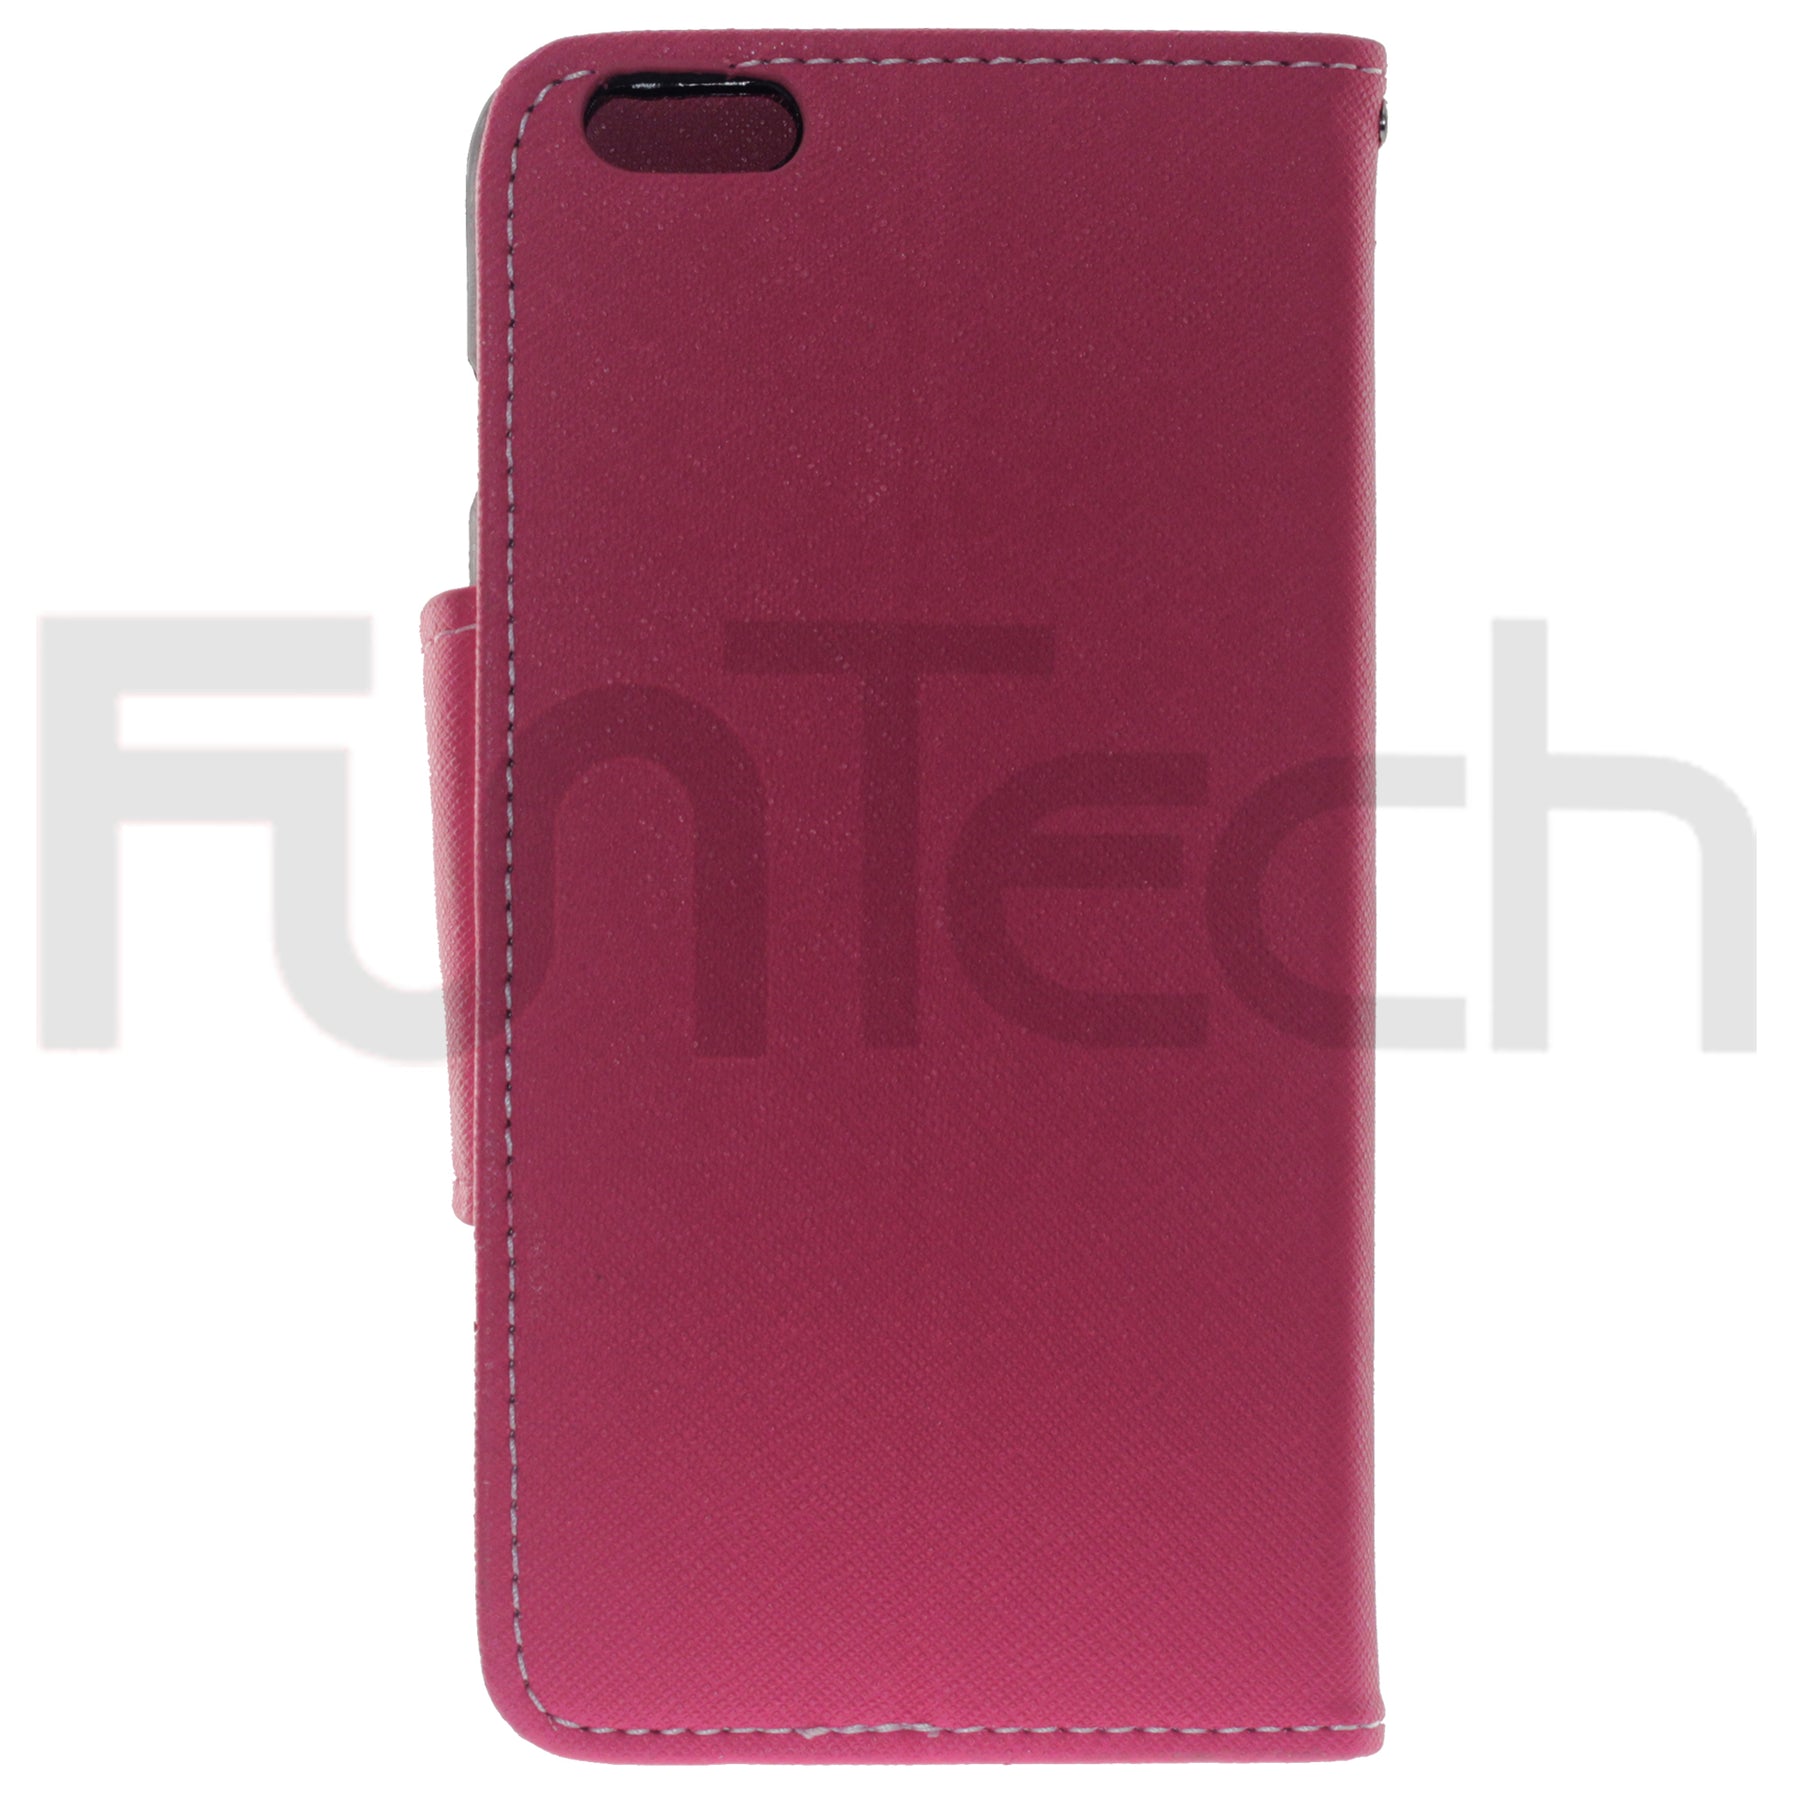 Apple, iPhone 6/6S, 5.5", Case, Color Red.